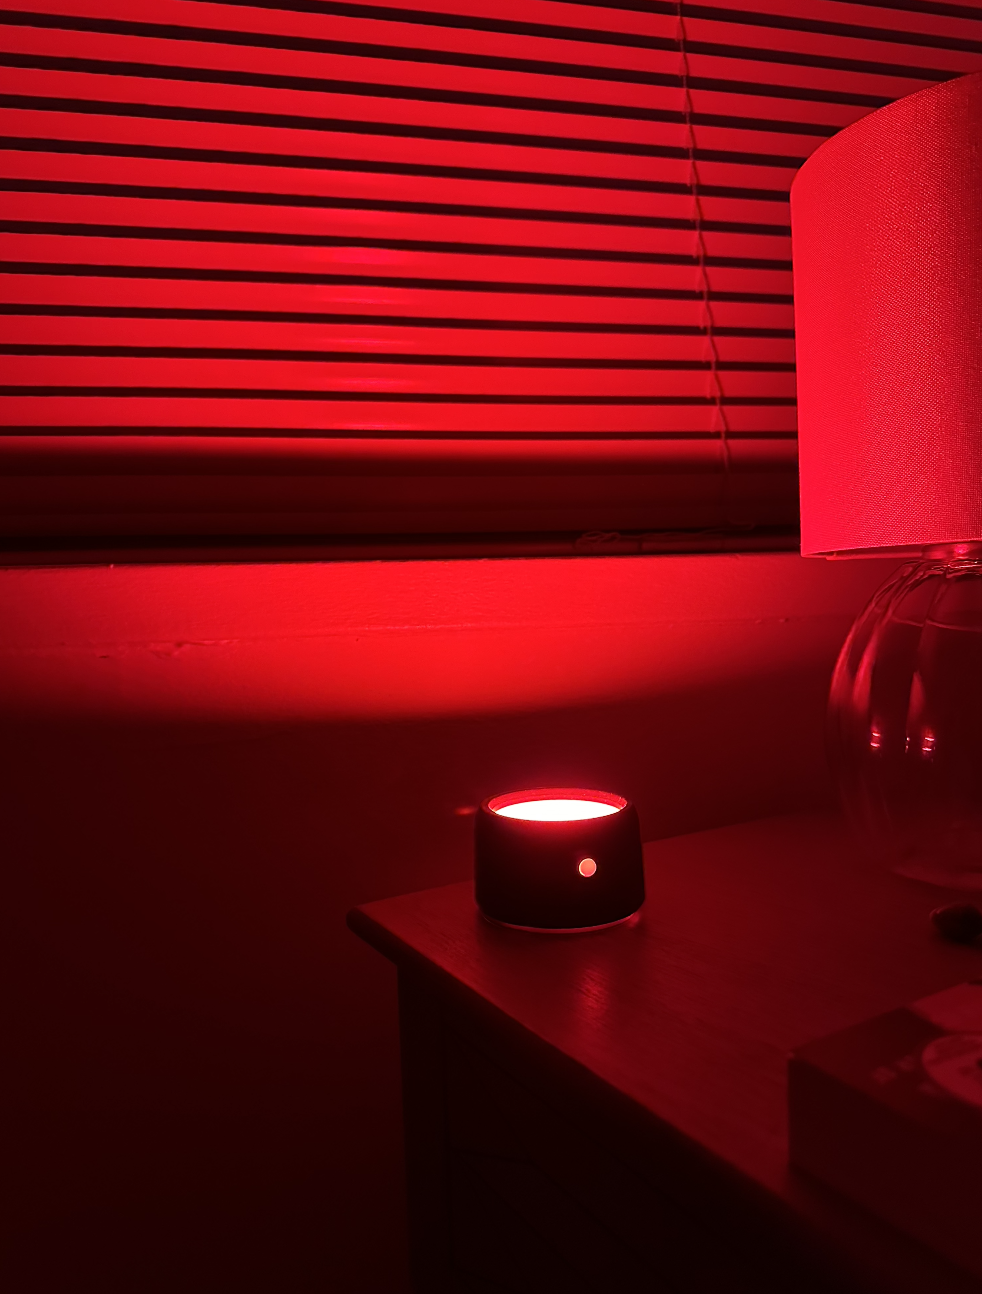 Smart speaker on a nightstand illuminated by red light